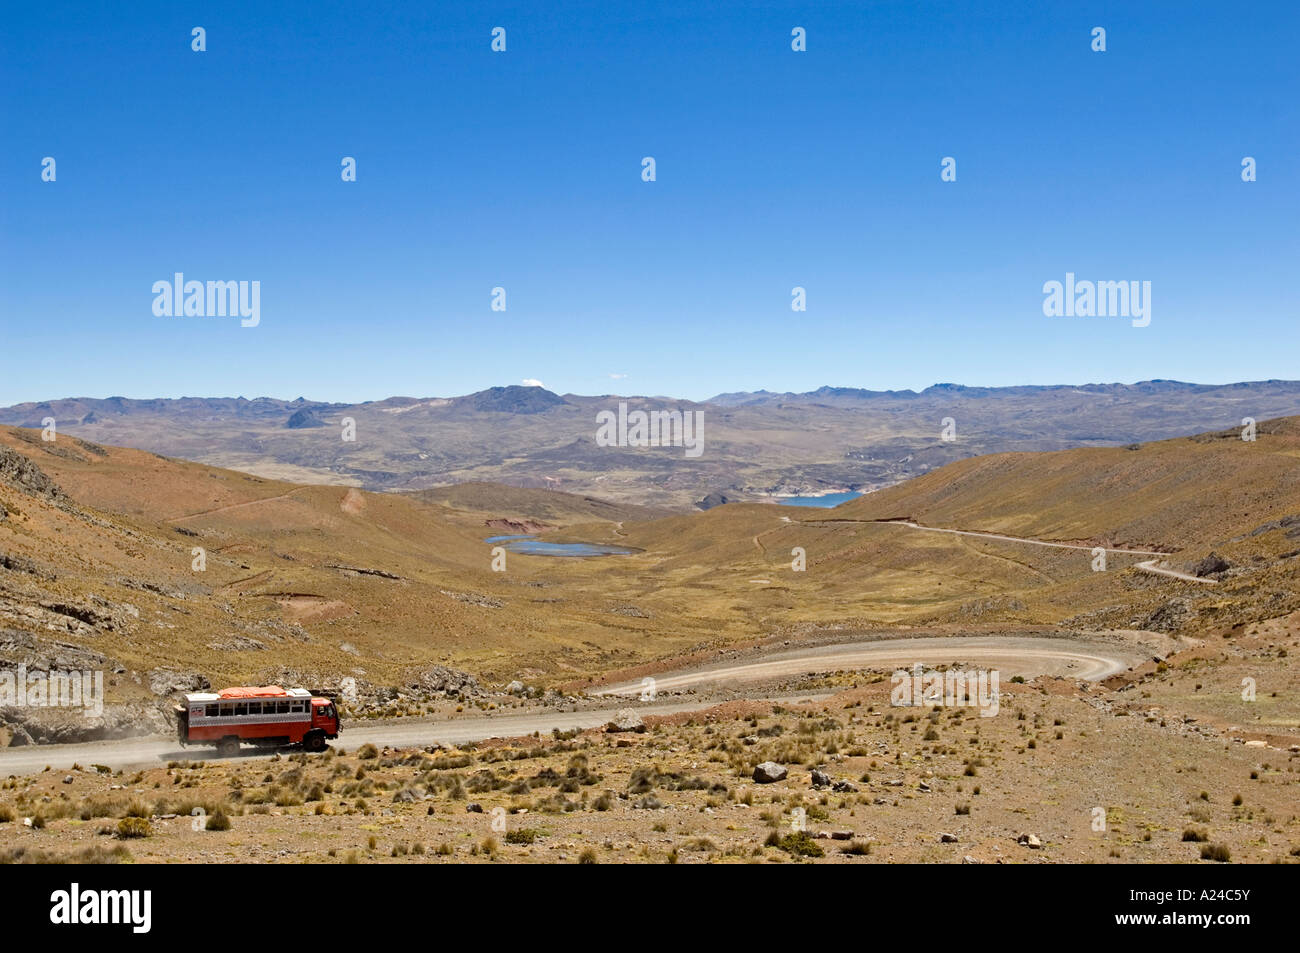 An overland adventure holiday truck driving on a dirt road through the rugged landscape scenery of Peru. Stock Photo